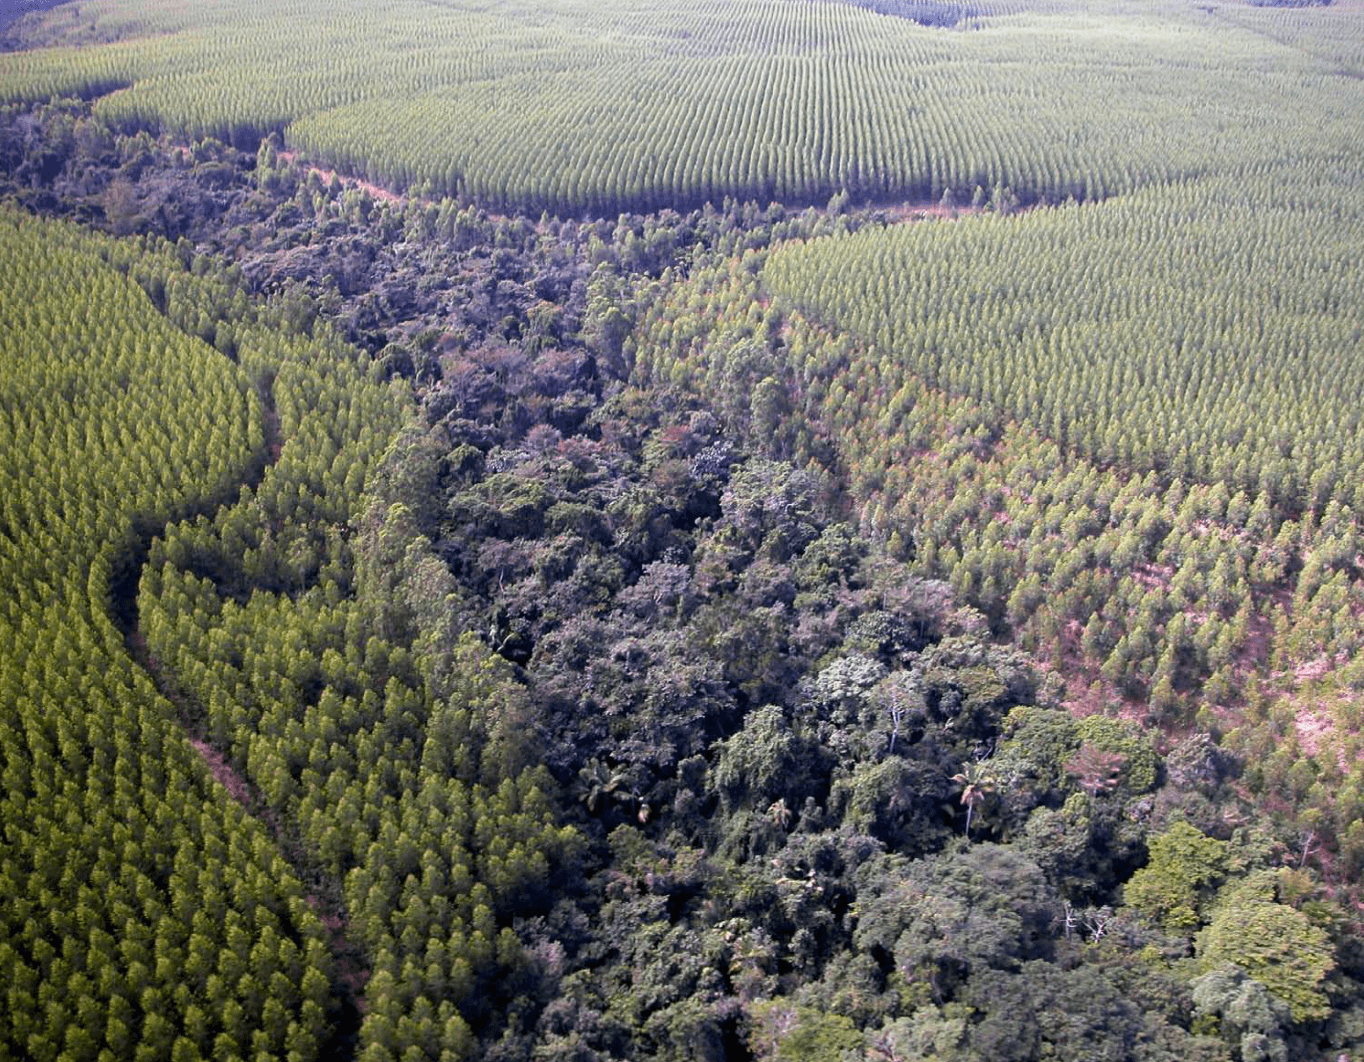 Monoculture plantations on either side of a native forest